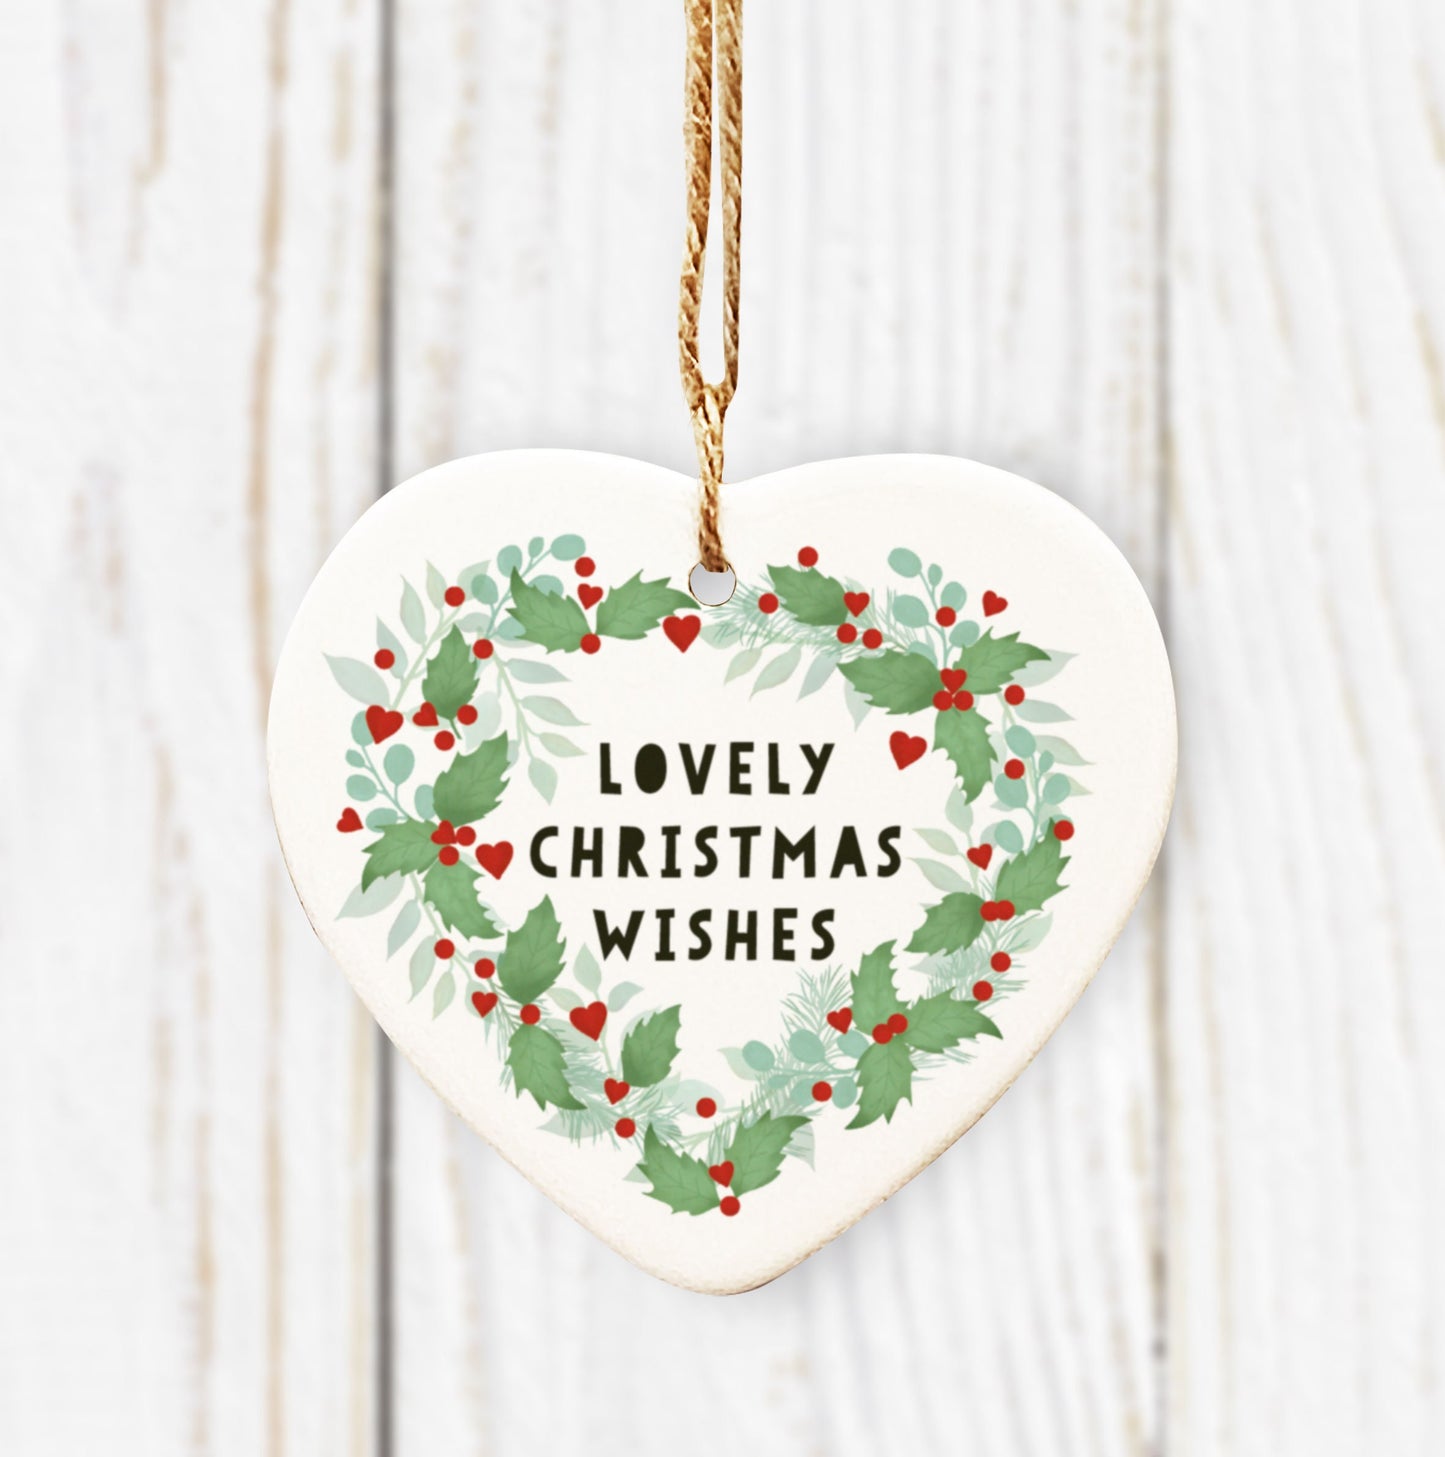 Lovely Christmas Wishes Heart Tree Decoration. Holly & Foliage Wreath Christmas Decoration. Pretty Christmas Dec .Personalised Tree Bauble